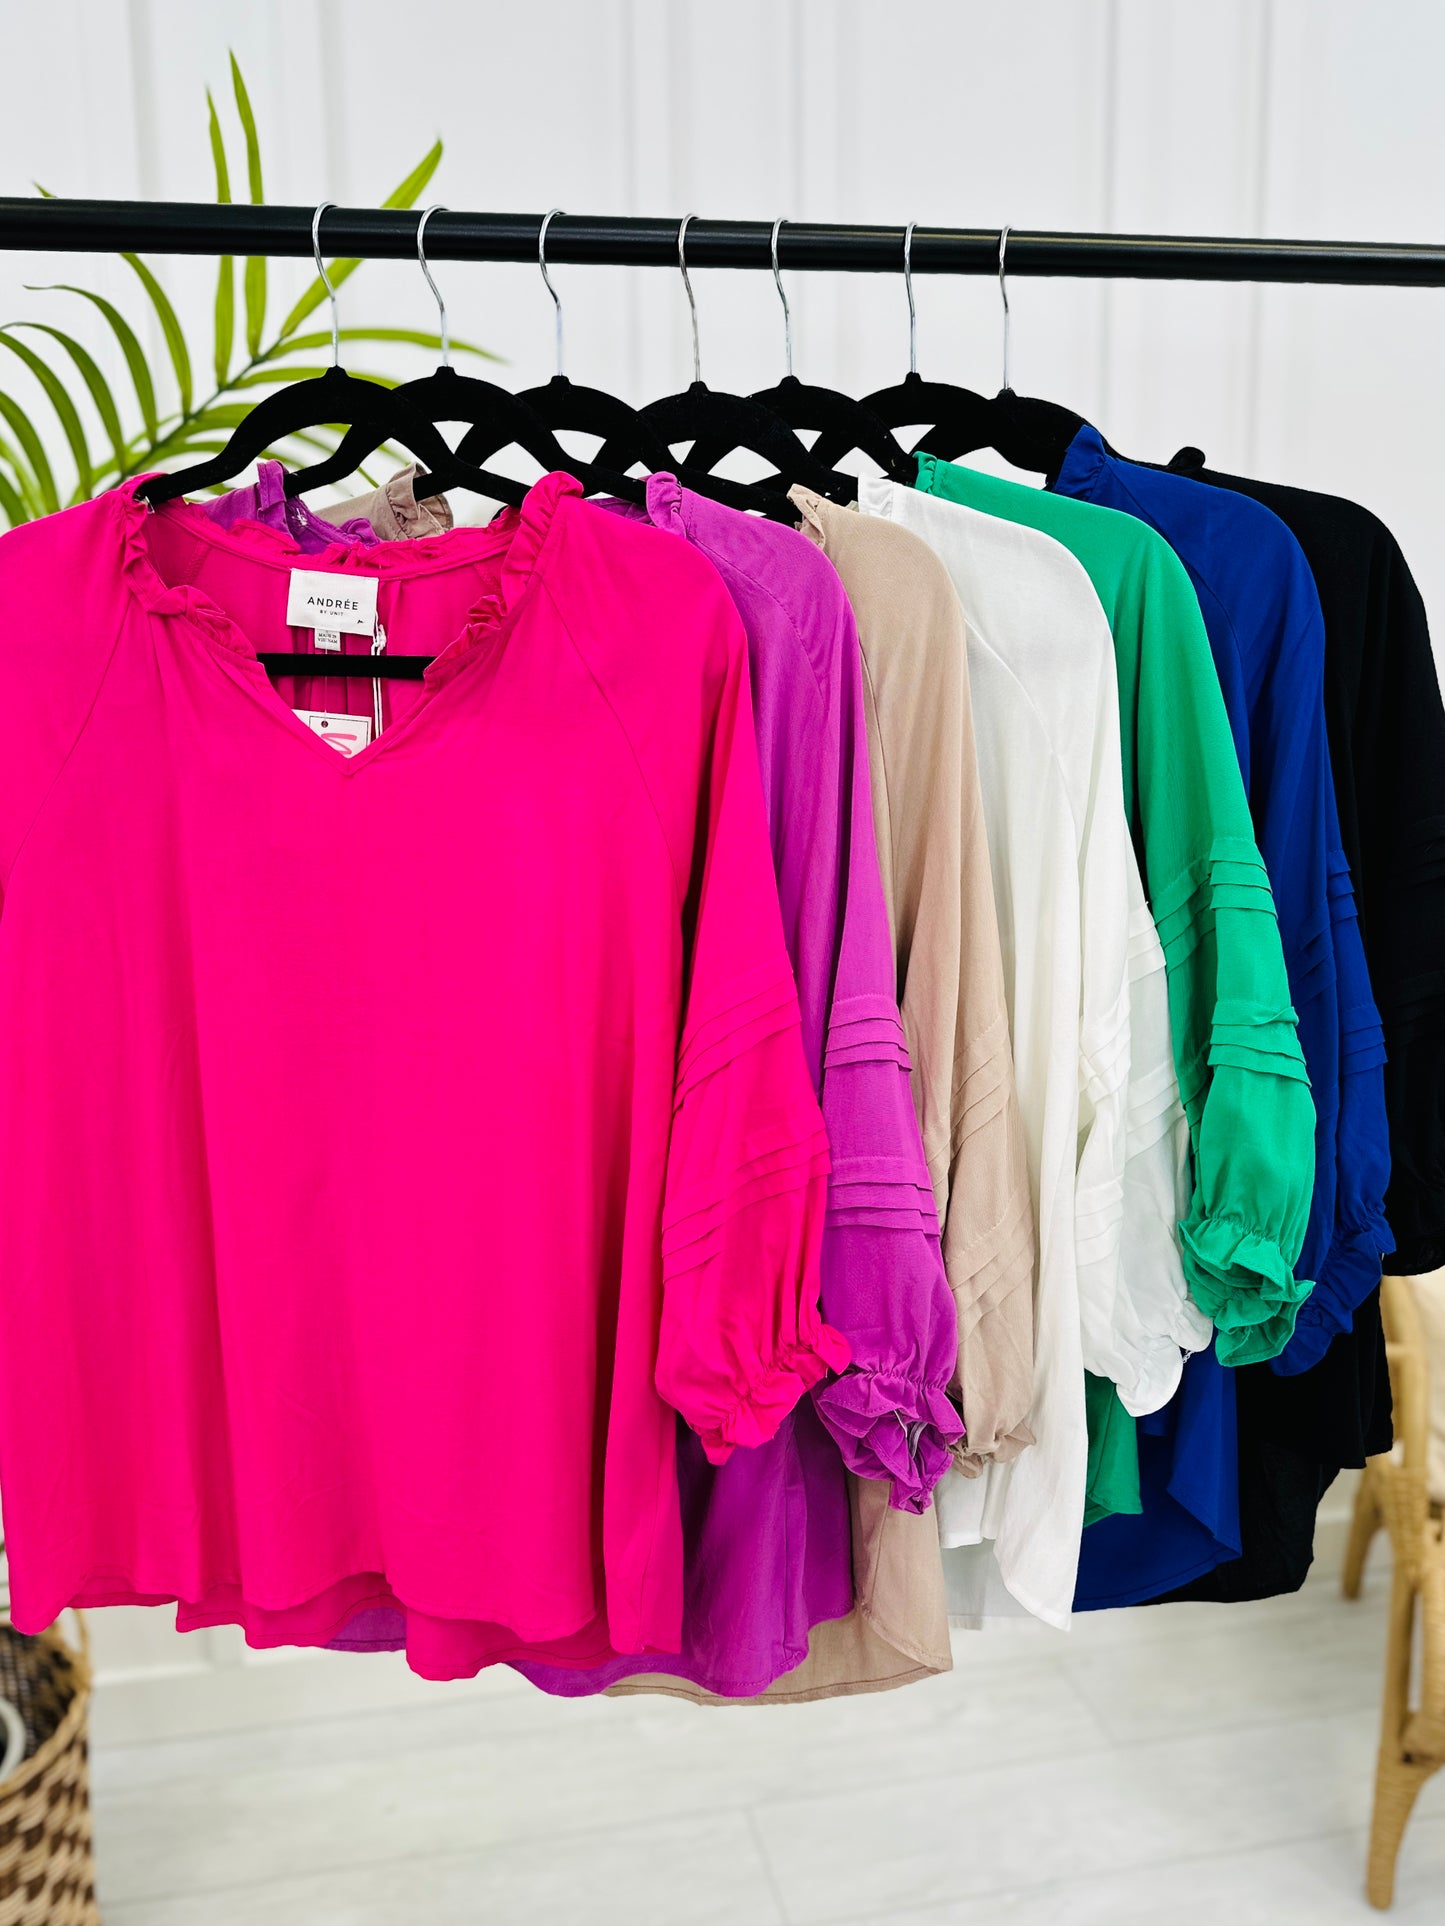 REG/CURVY The Perfect Time And Place Top- Multiple Colors!